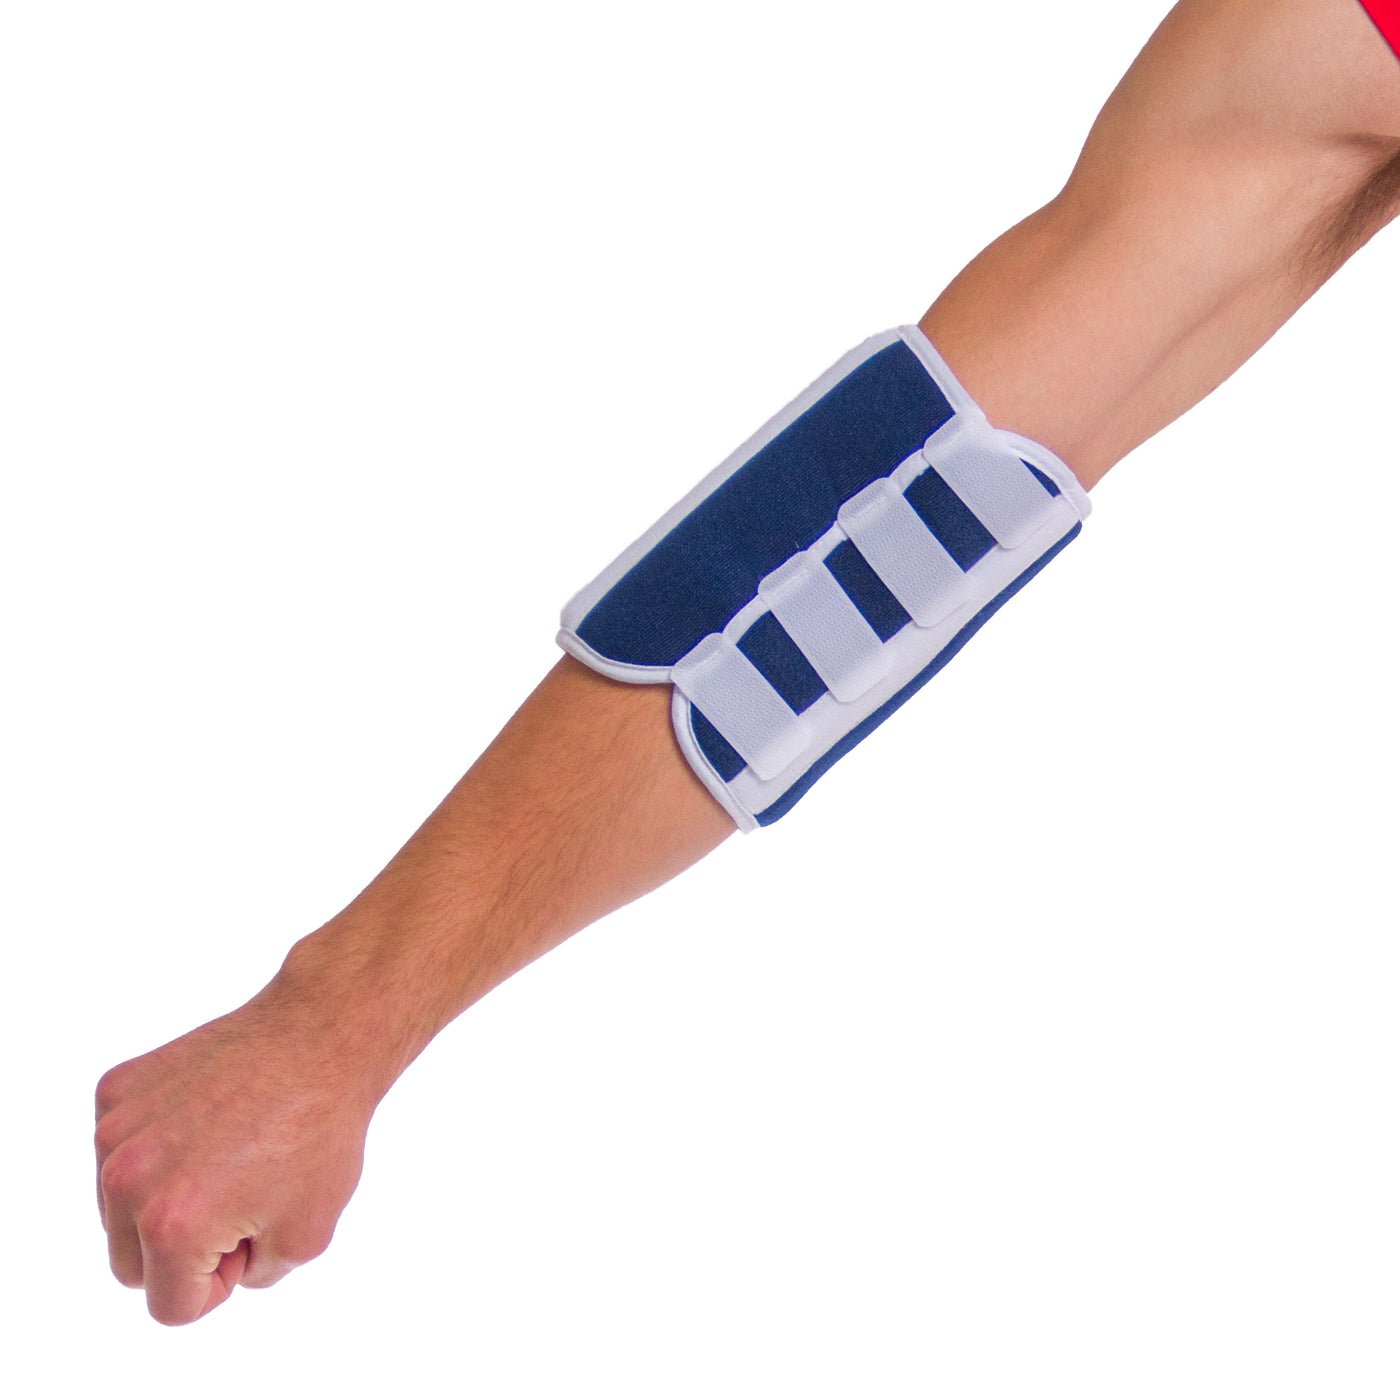 Adult elbow splint and stabilizer helps prevent elbow flexion (bending) while sleeping